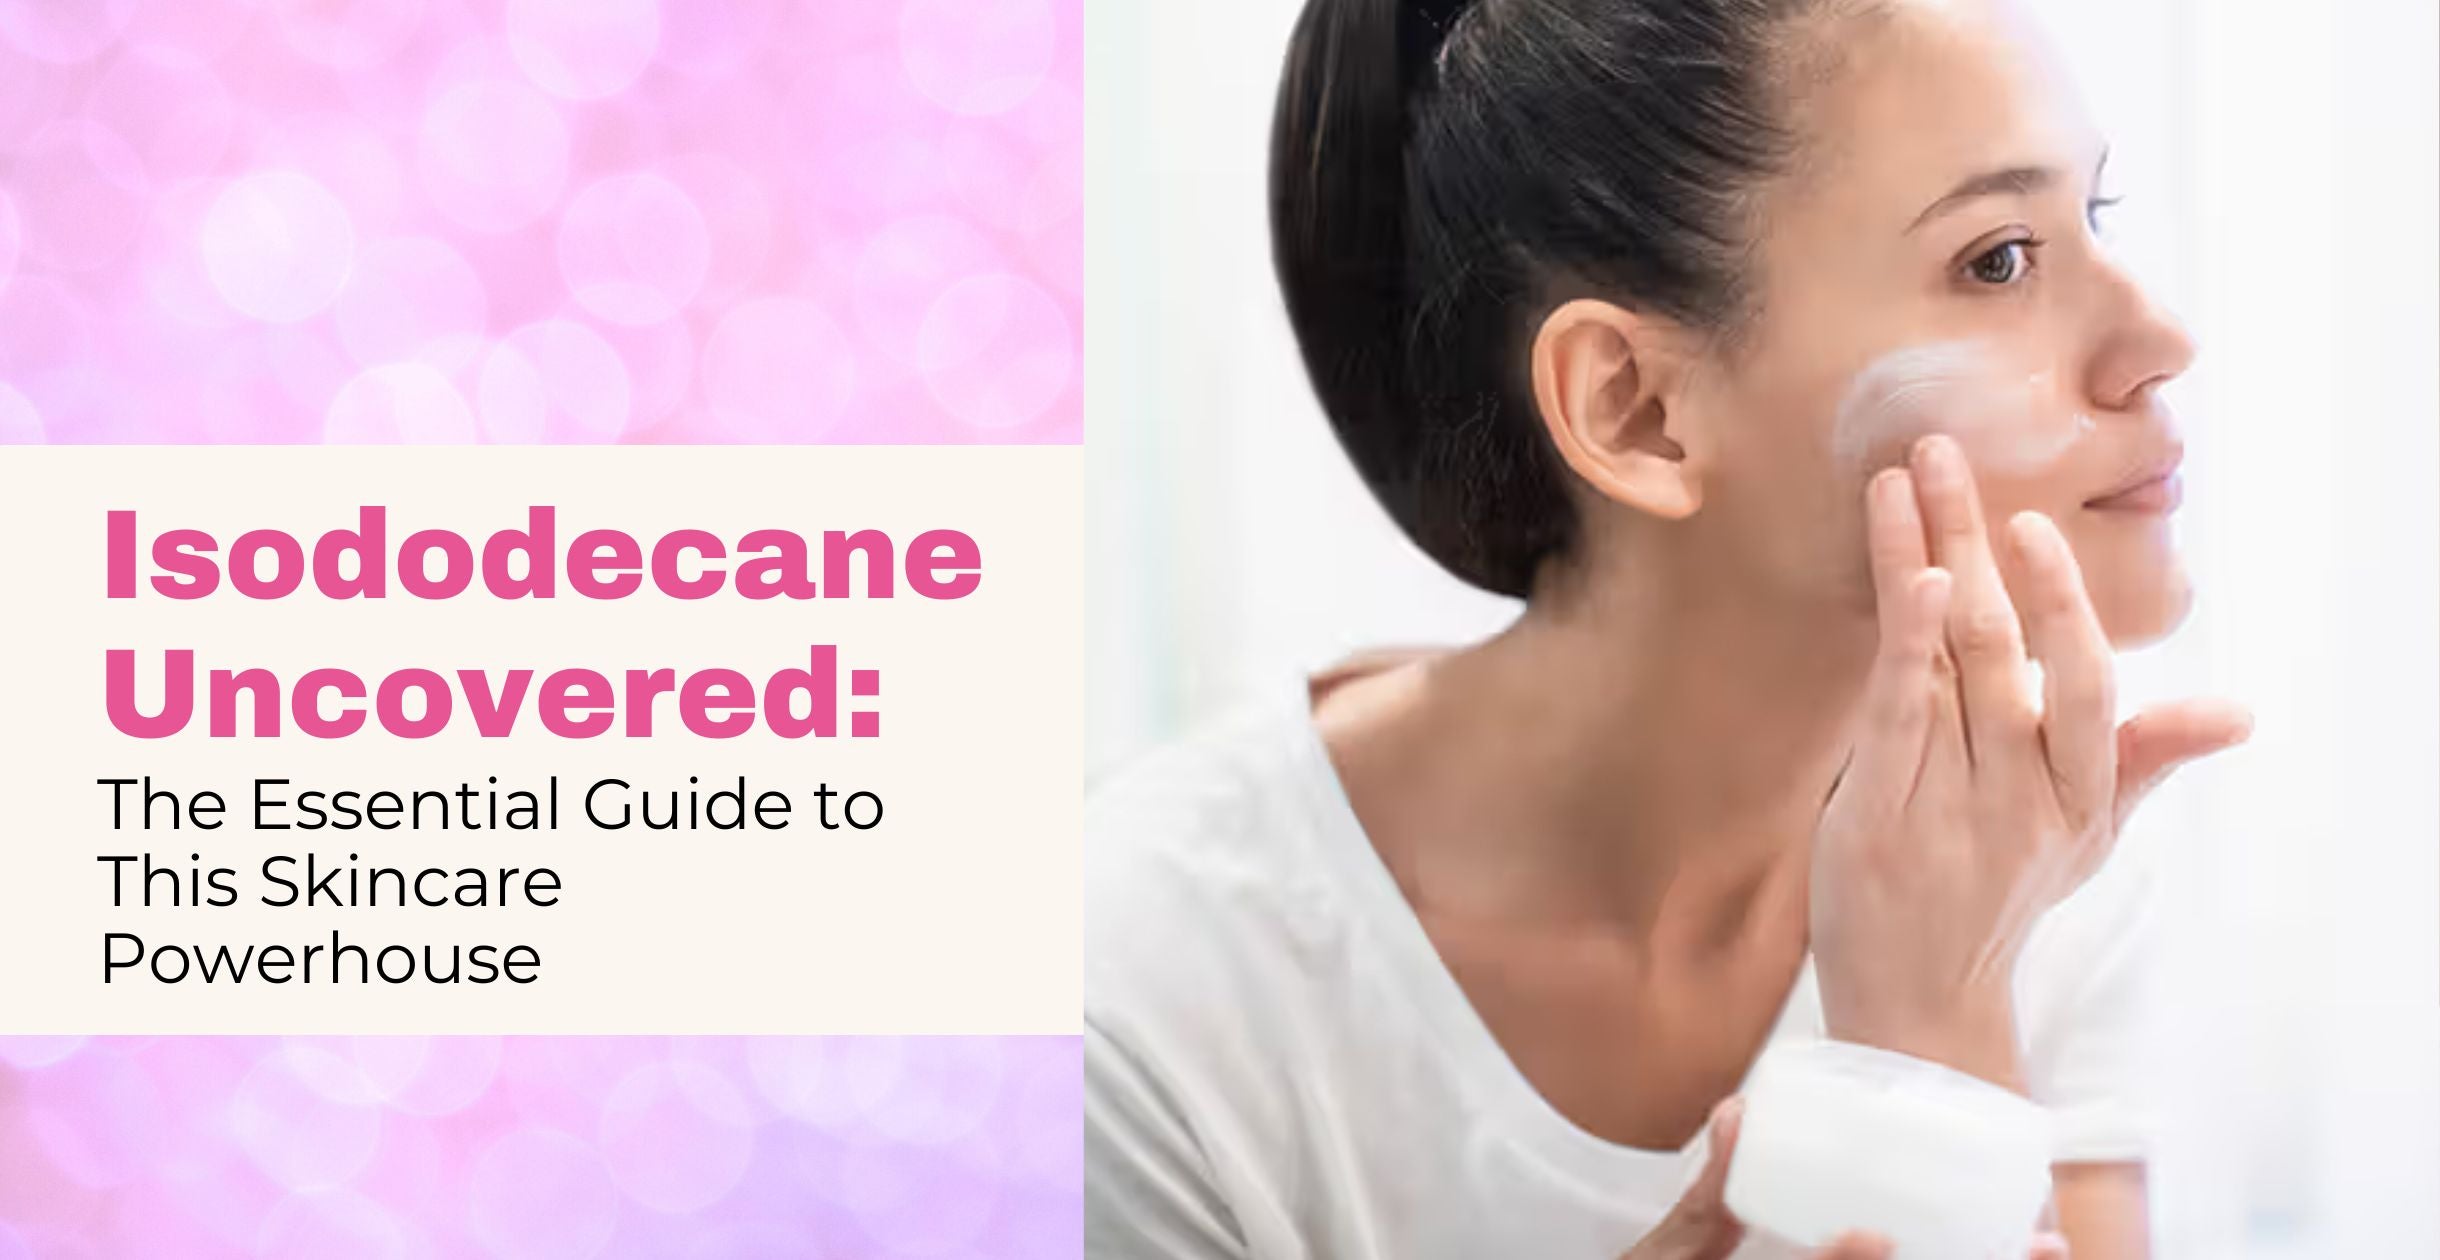 Isododecane Uncovered: The Essential Guide to This Skincare Powerhouse